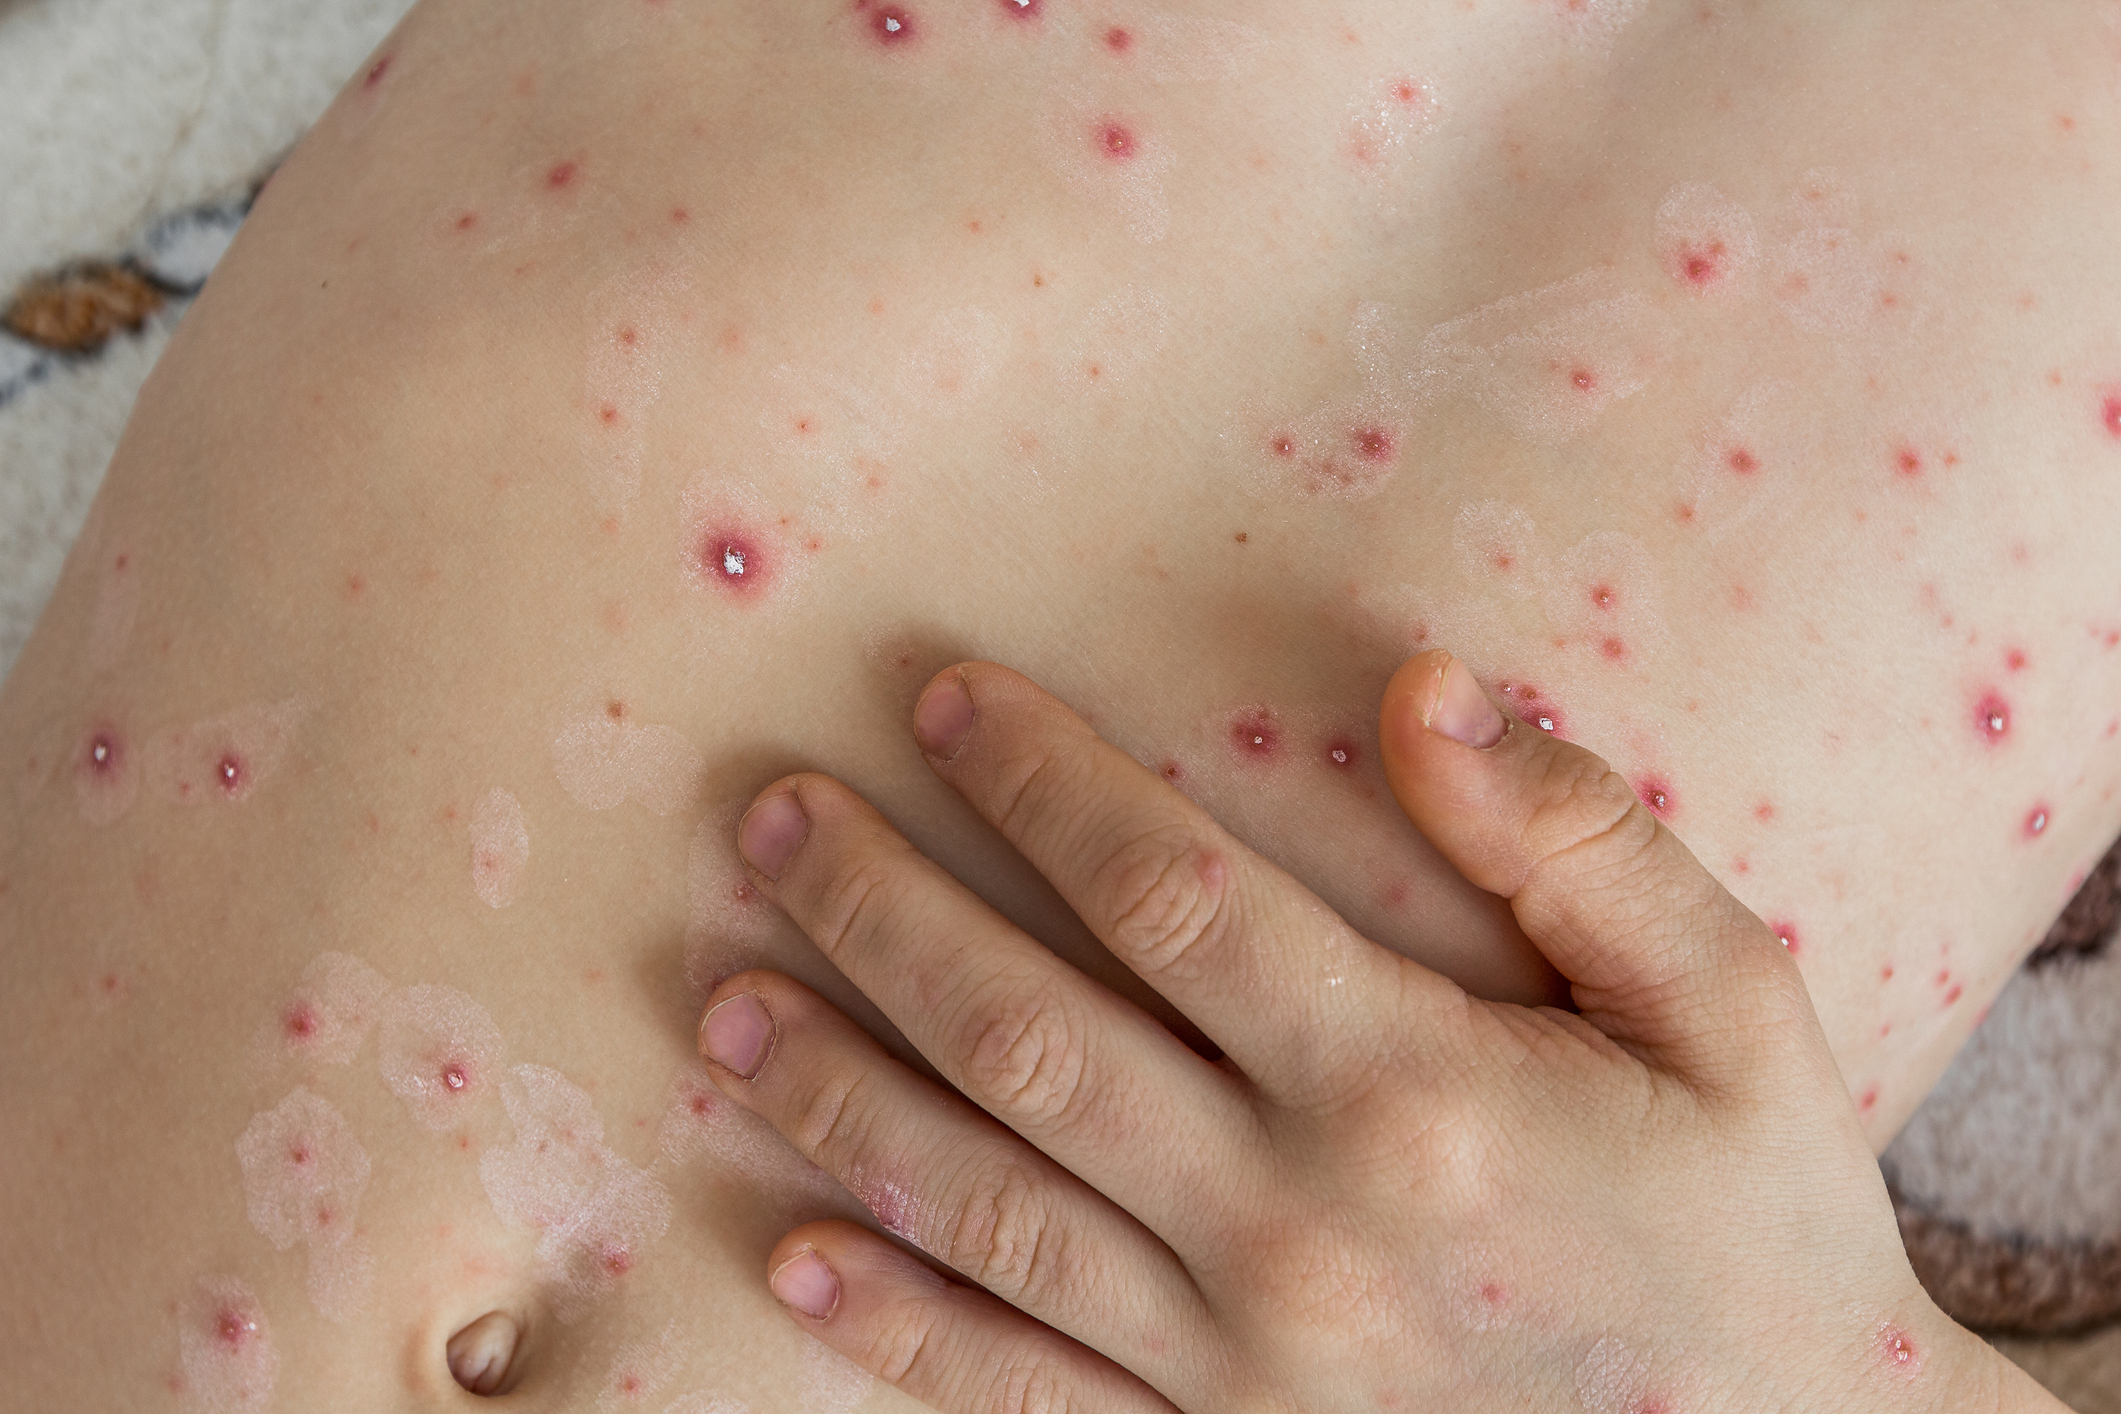 Close-up of a person&#x27;s skin showing a rash with multiple raised bumps